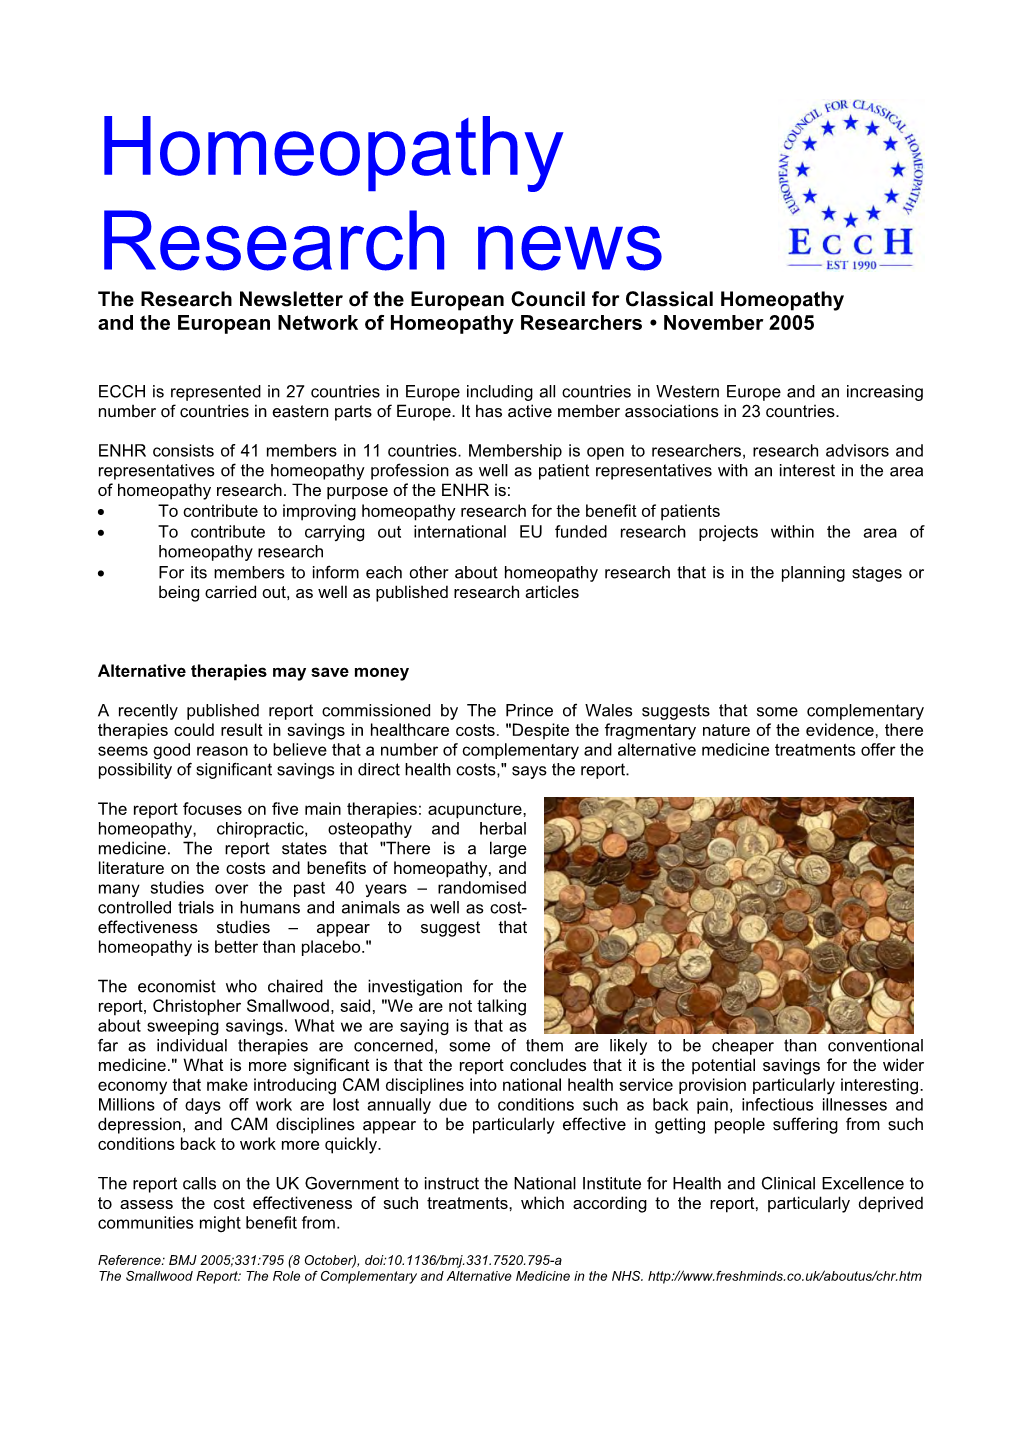 Homeopathy Research News the Research Newsletter of the European Council for Classical Homeopathy and the European Network of Homeopathy Researchers • November 2005